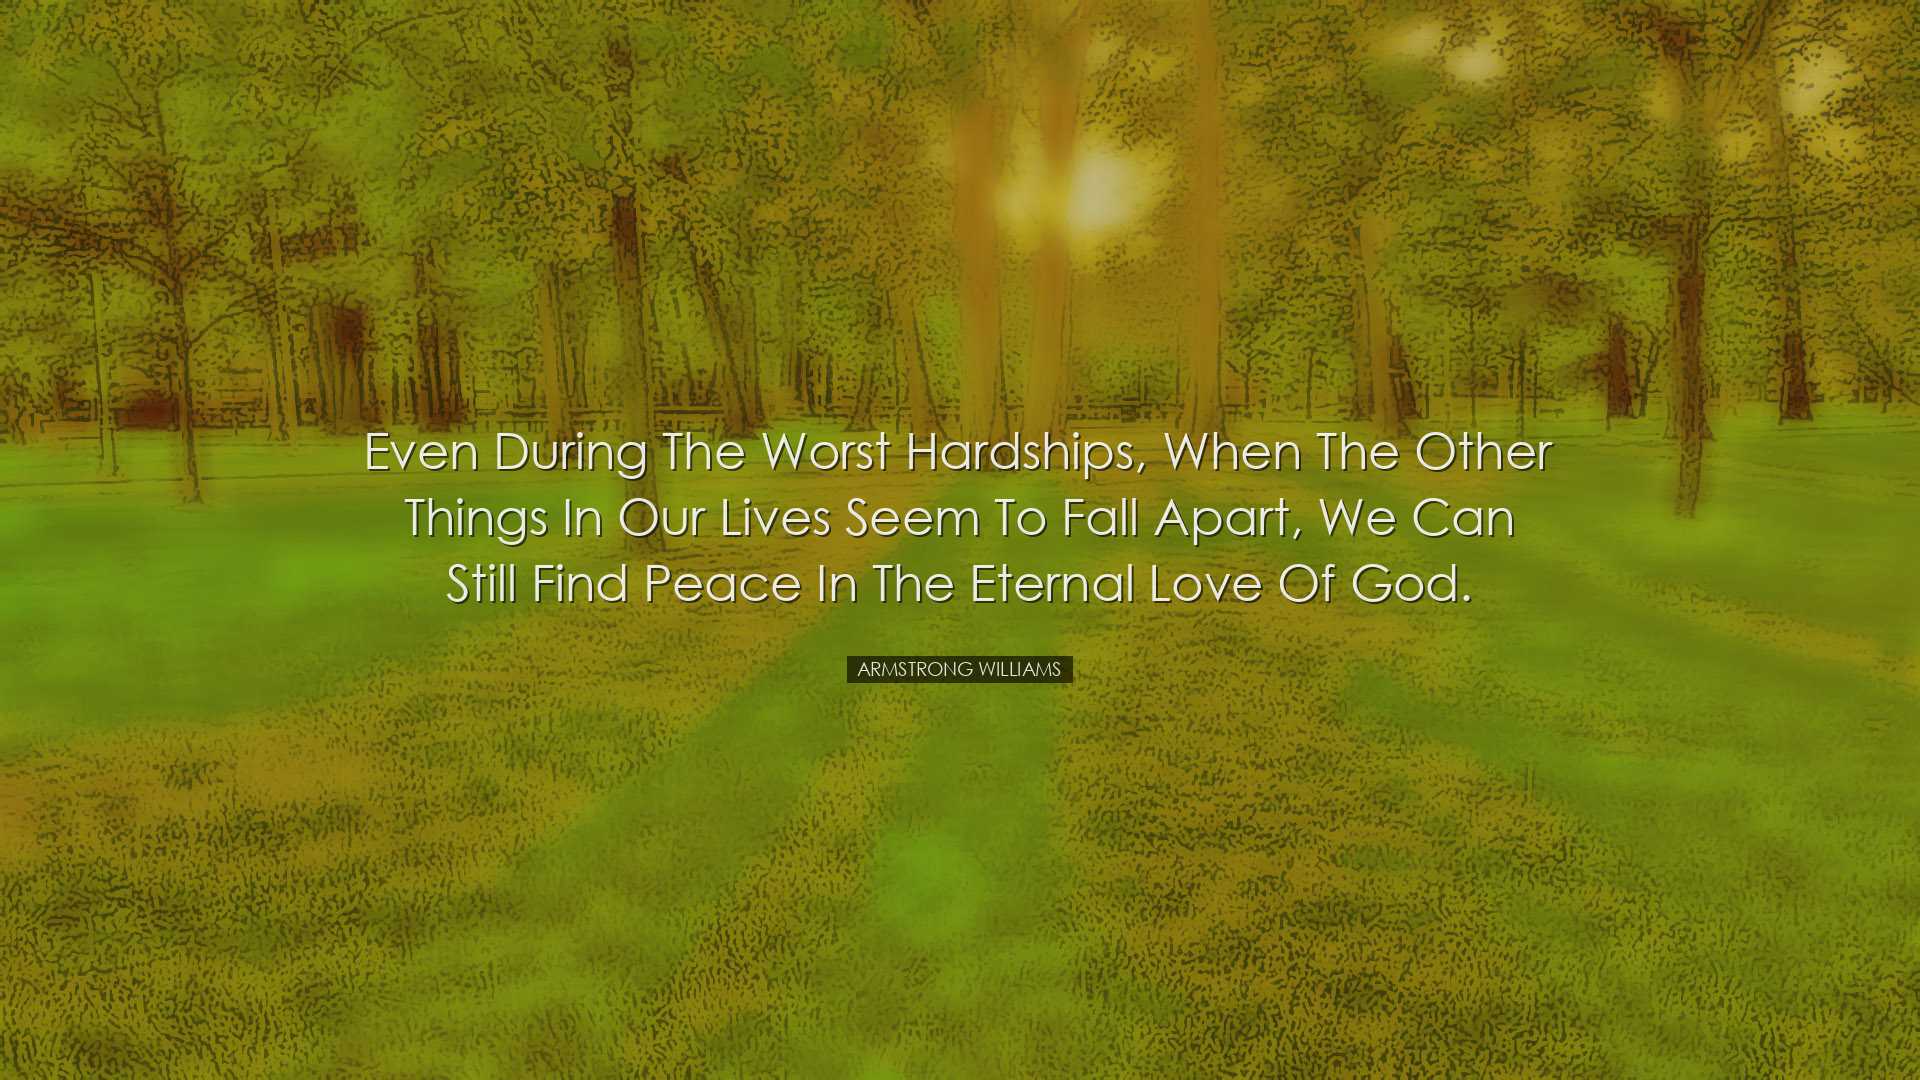 Even during the worst hardships, when the other things in our live